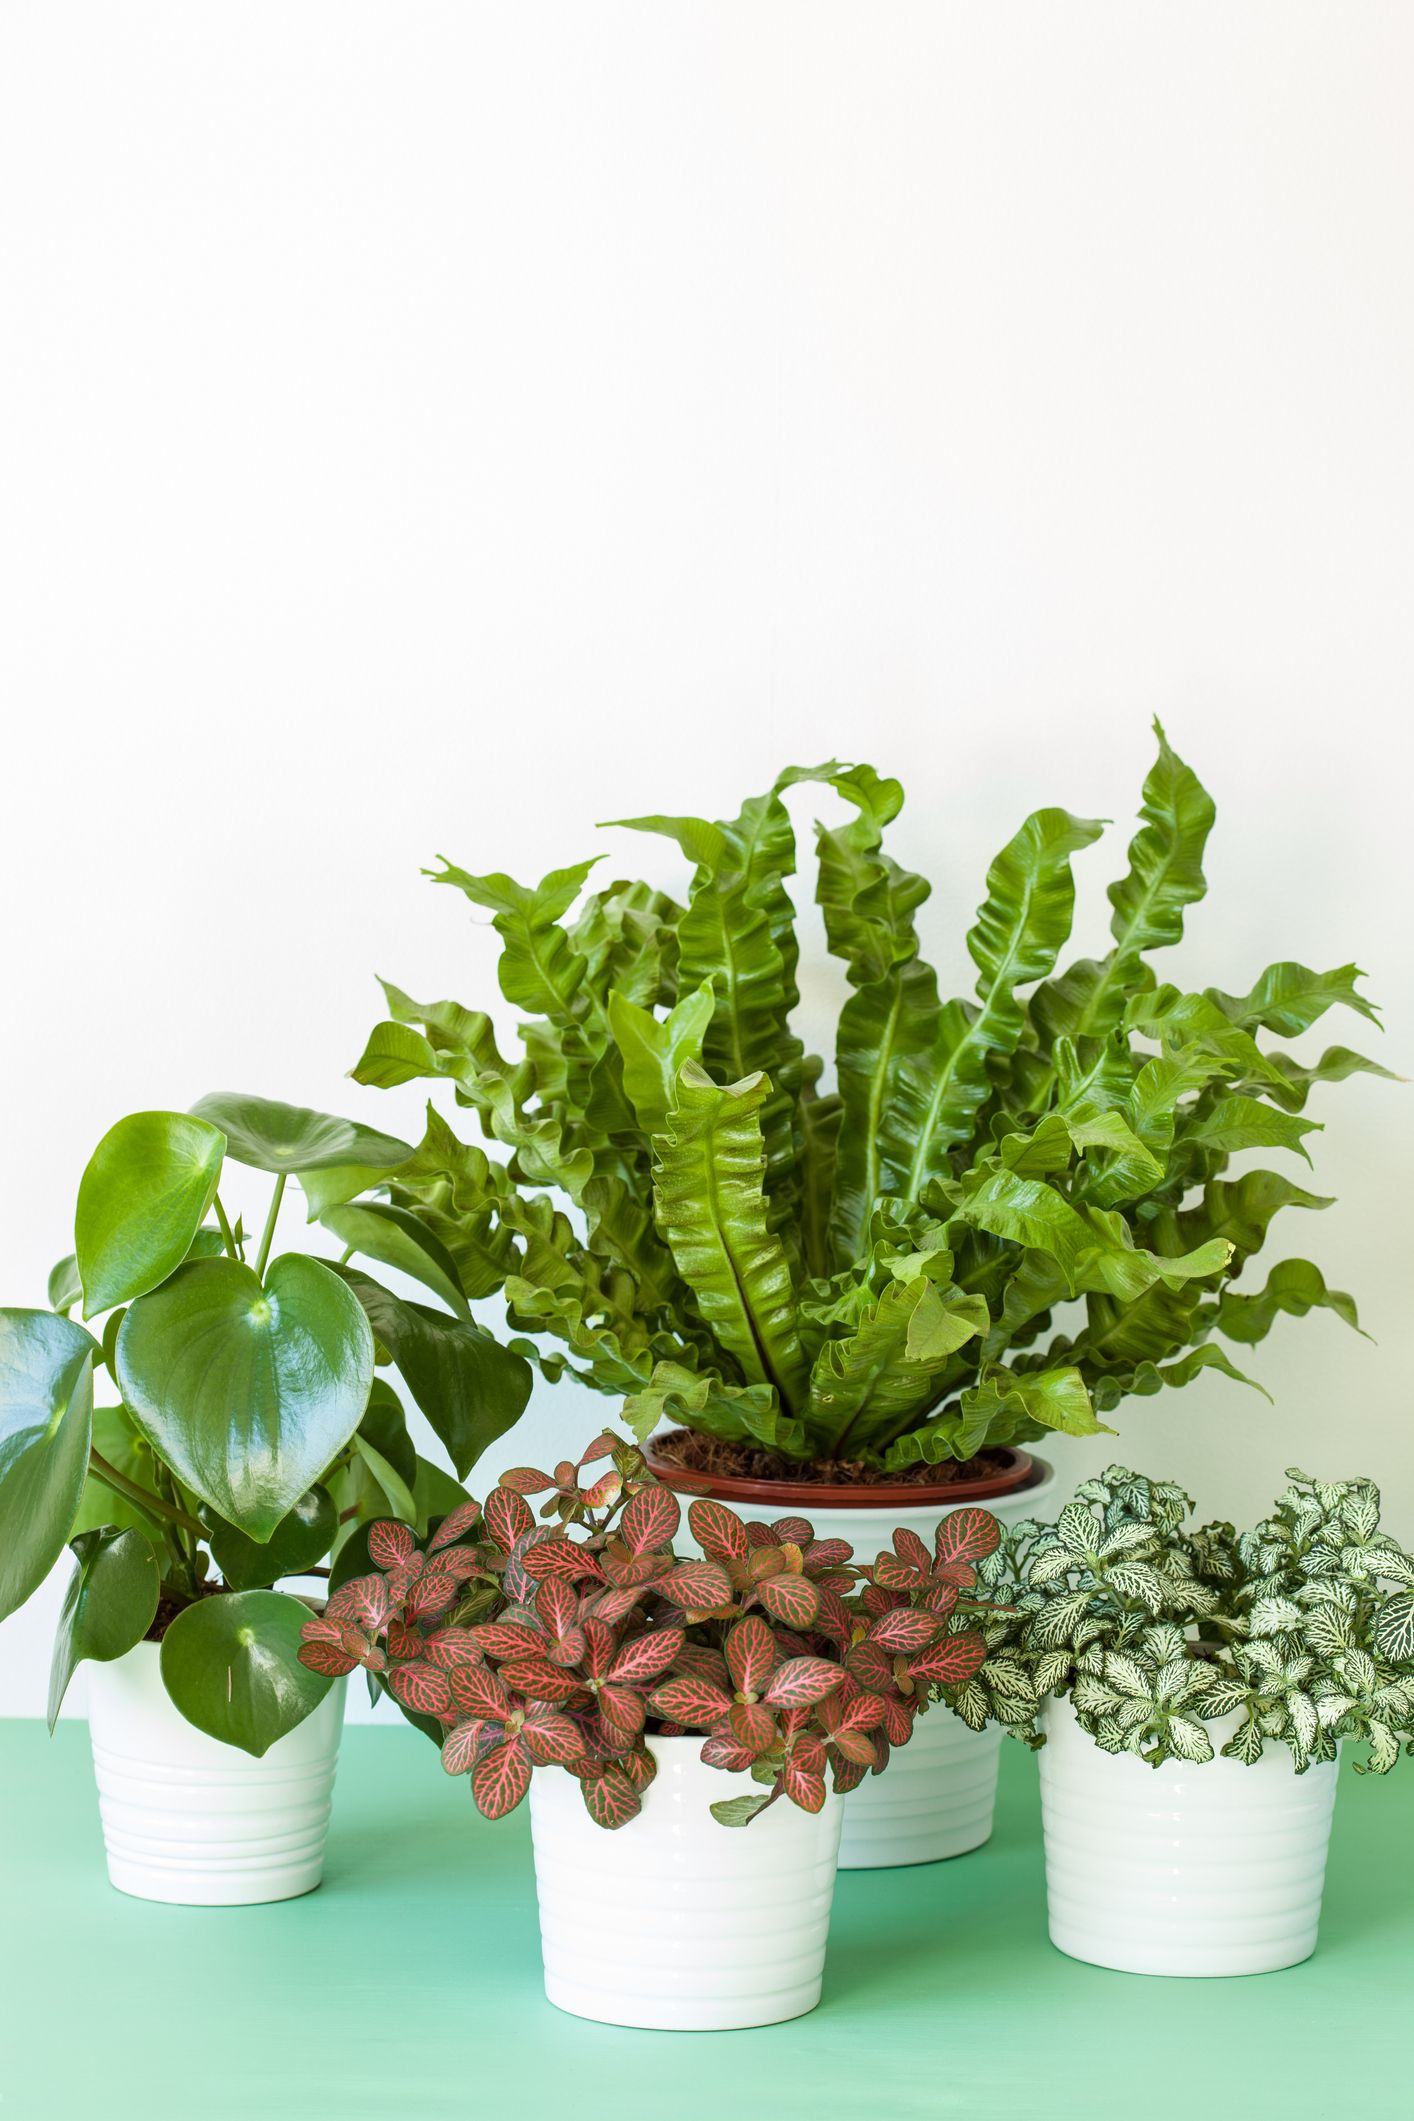 House plants names and care tips